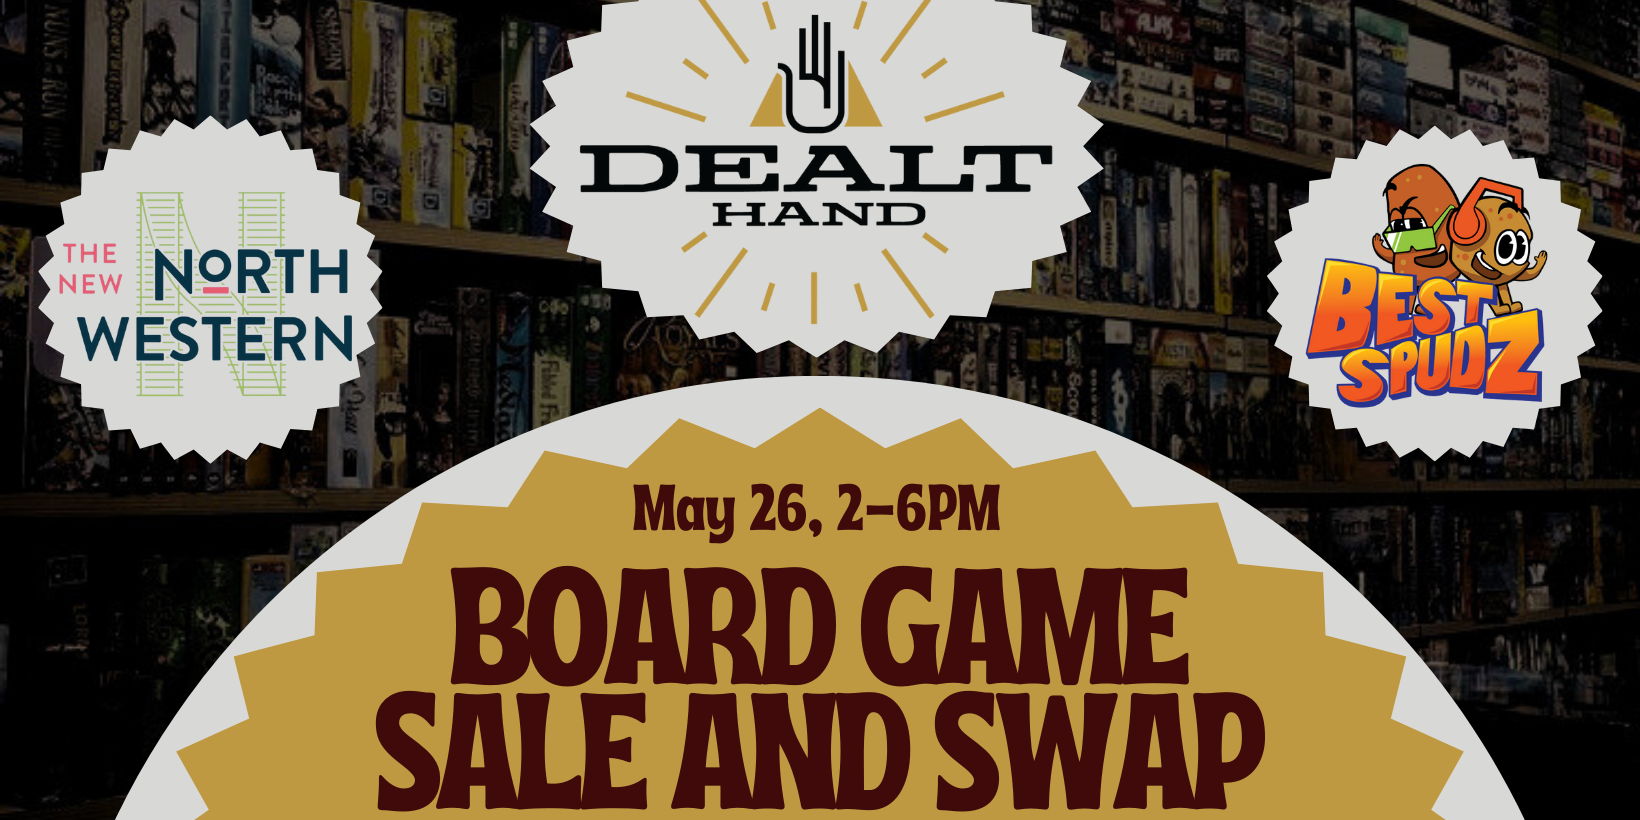 Board Game Sale and Swap promotional image